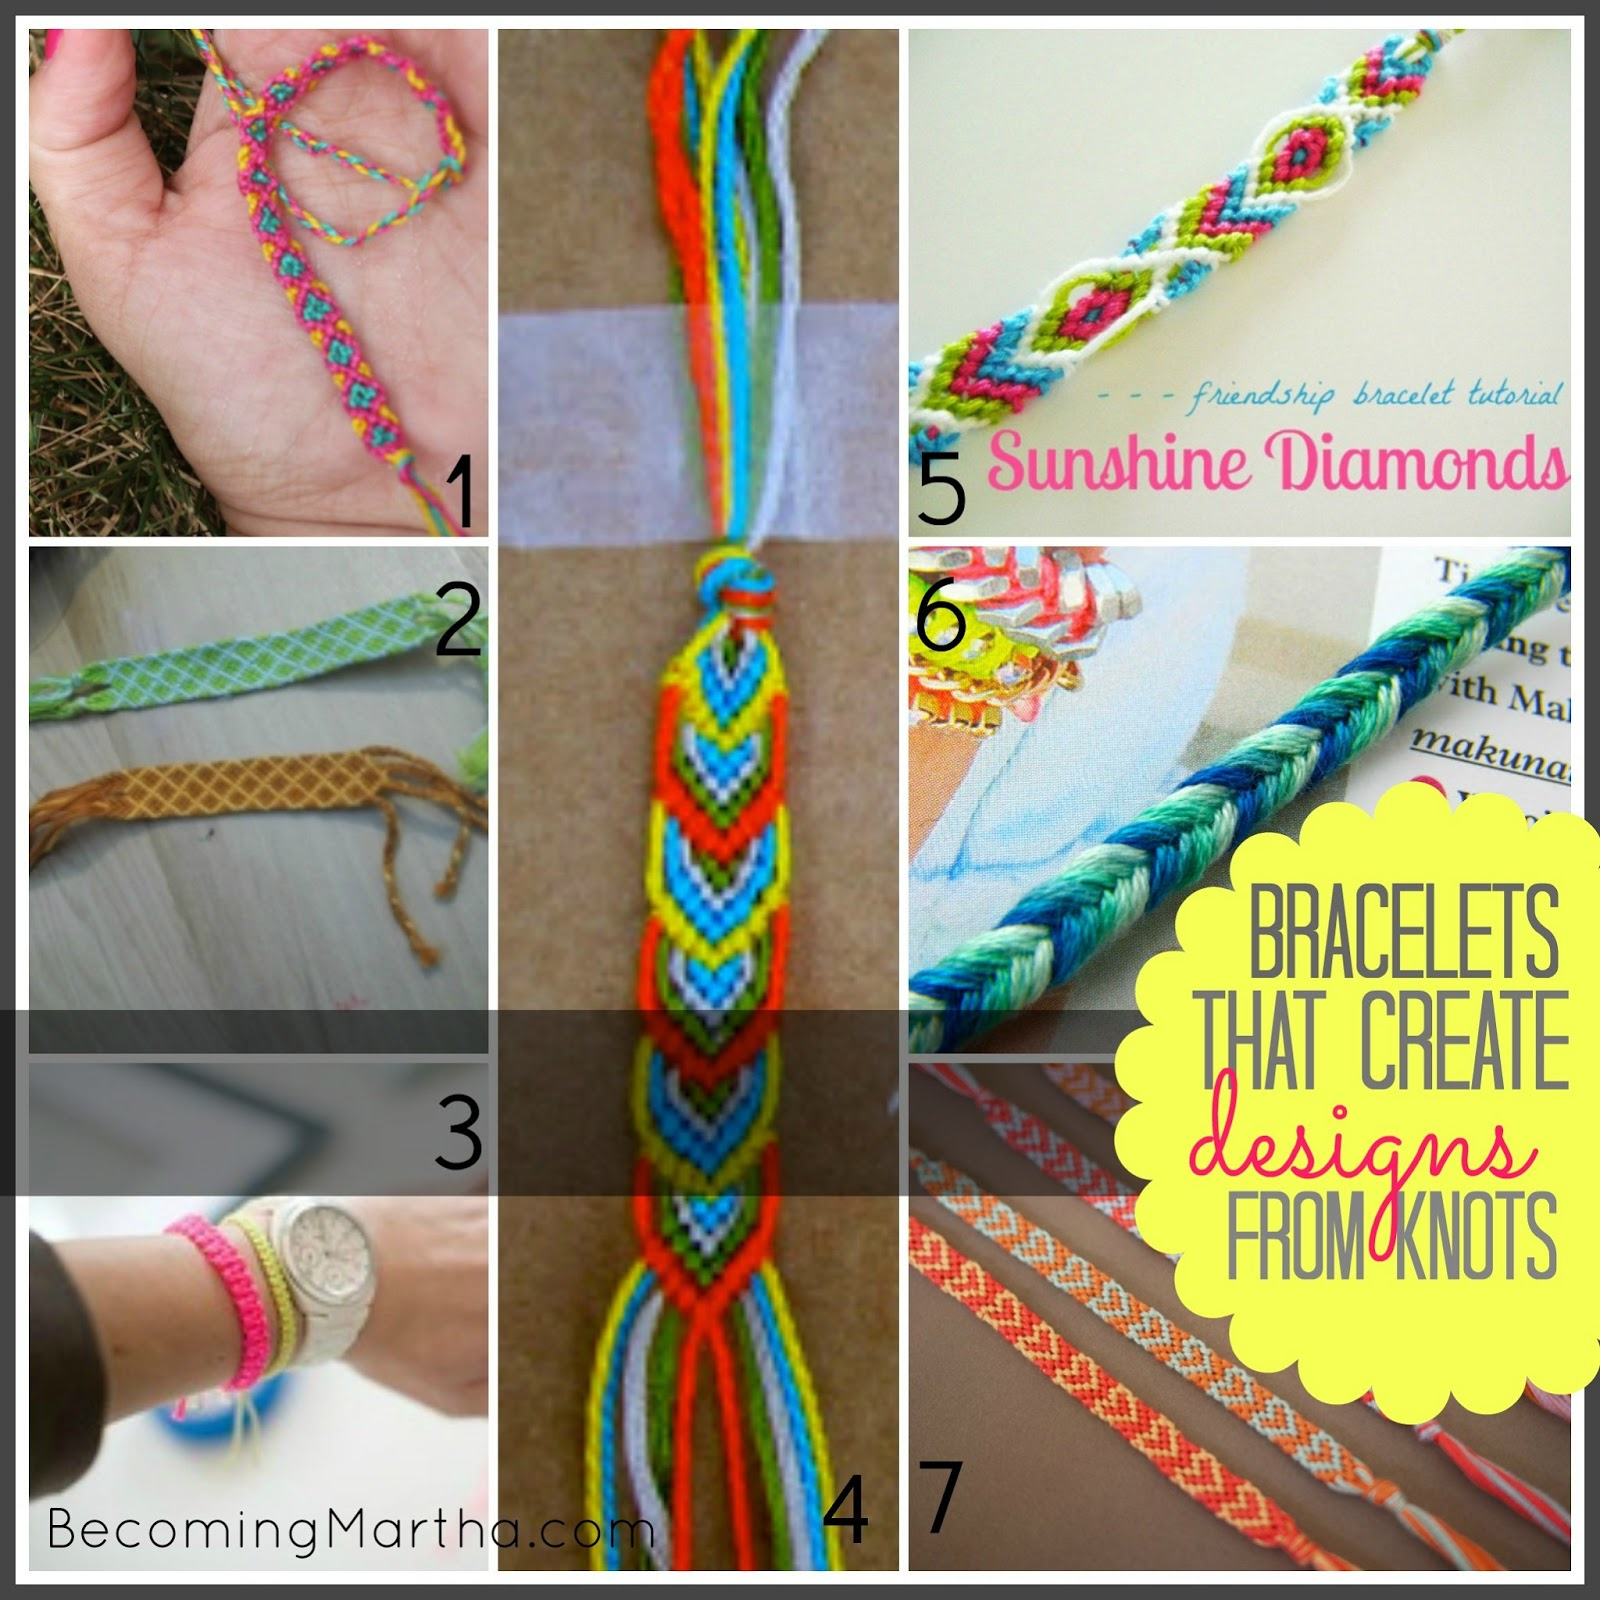 Embroidery Floss Friendship Bracelet Patterns 20 Friendship Bracelet Tutorials From 1 Supply The Simply Crafted Life